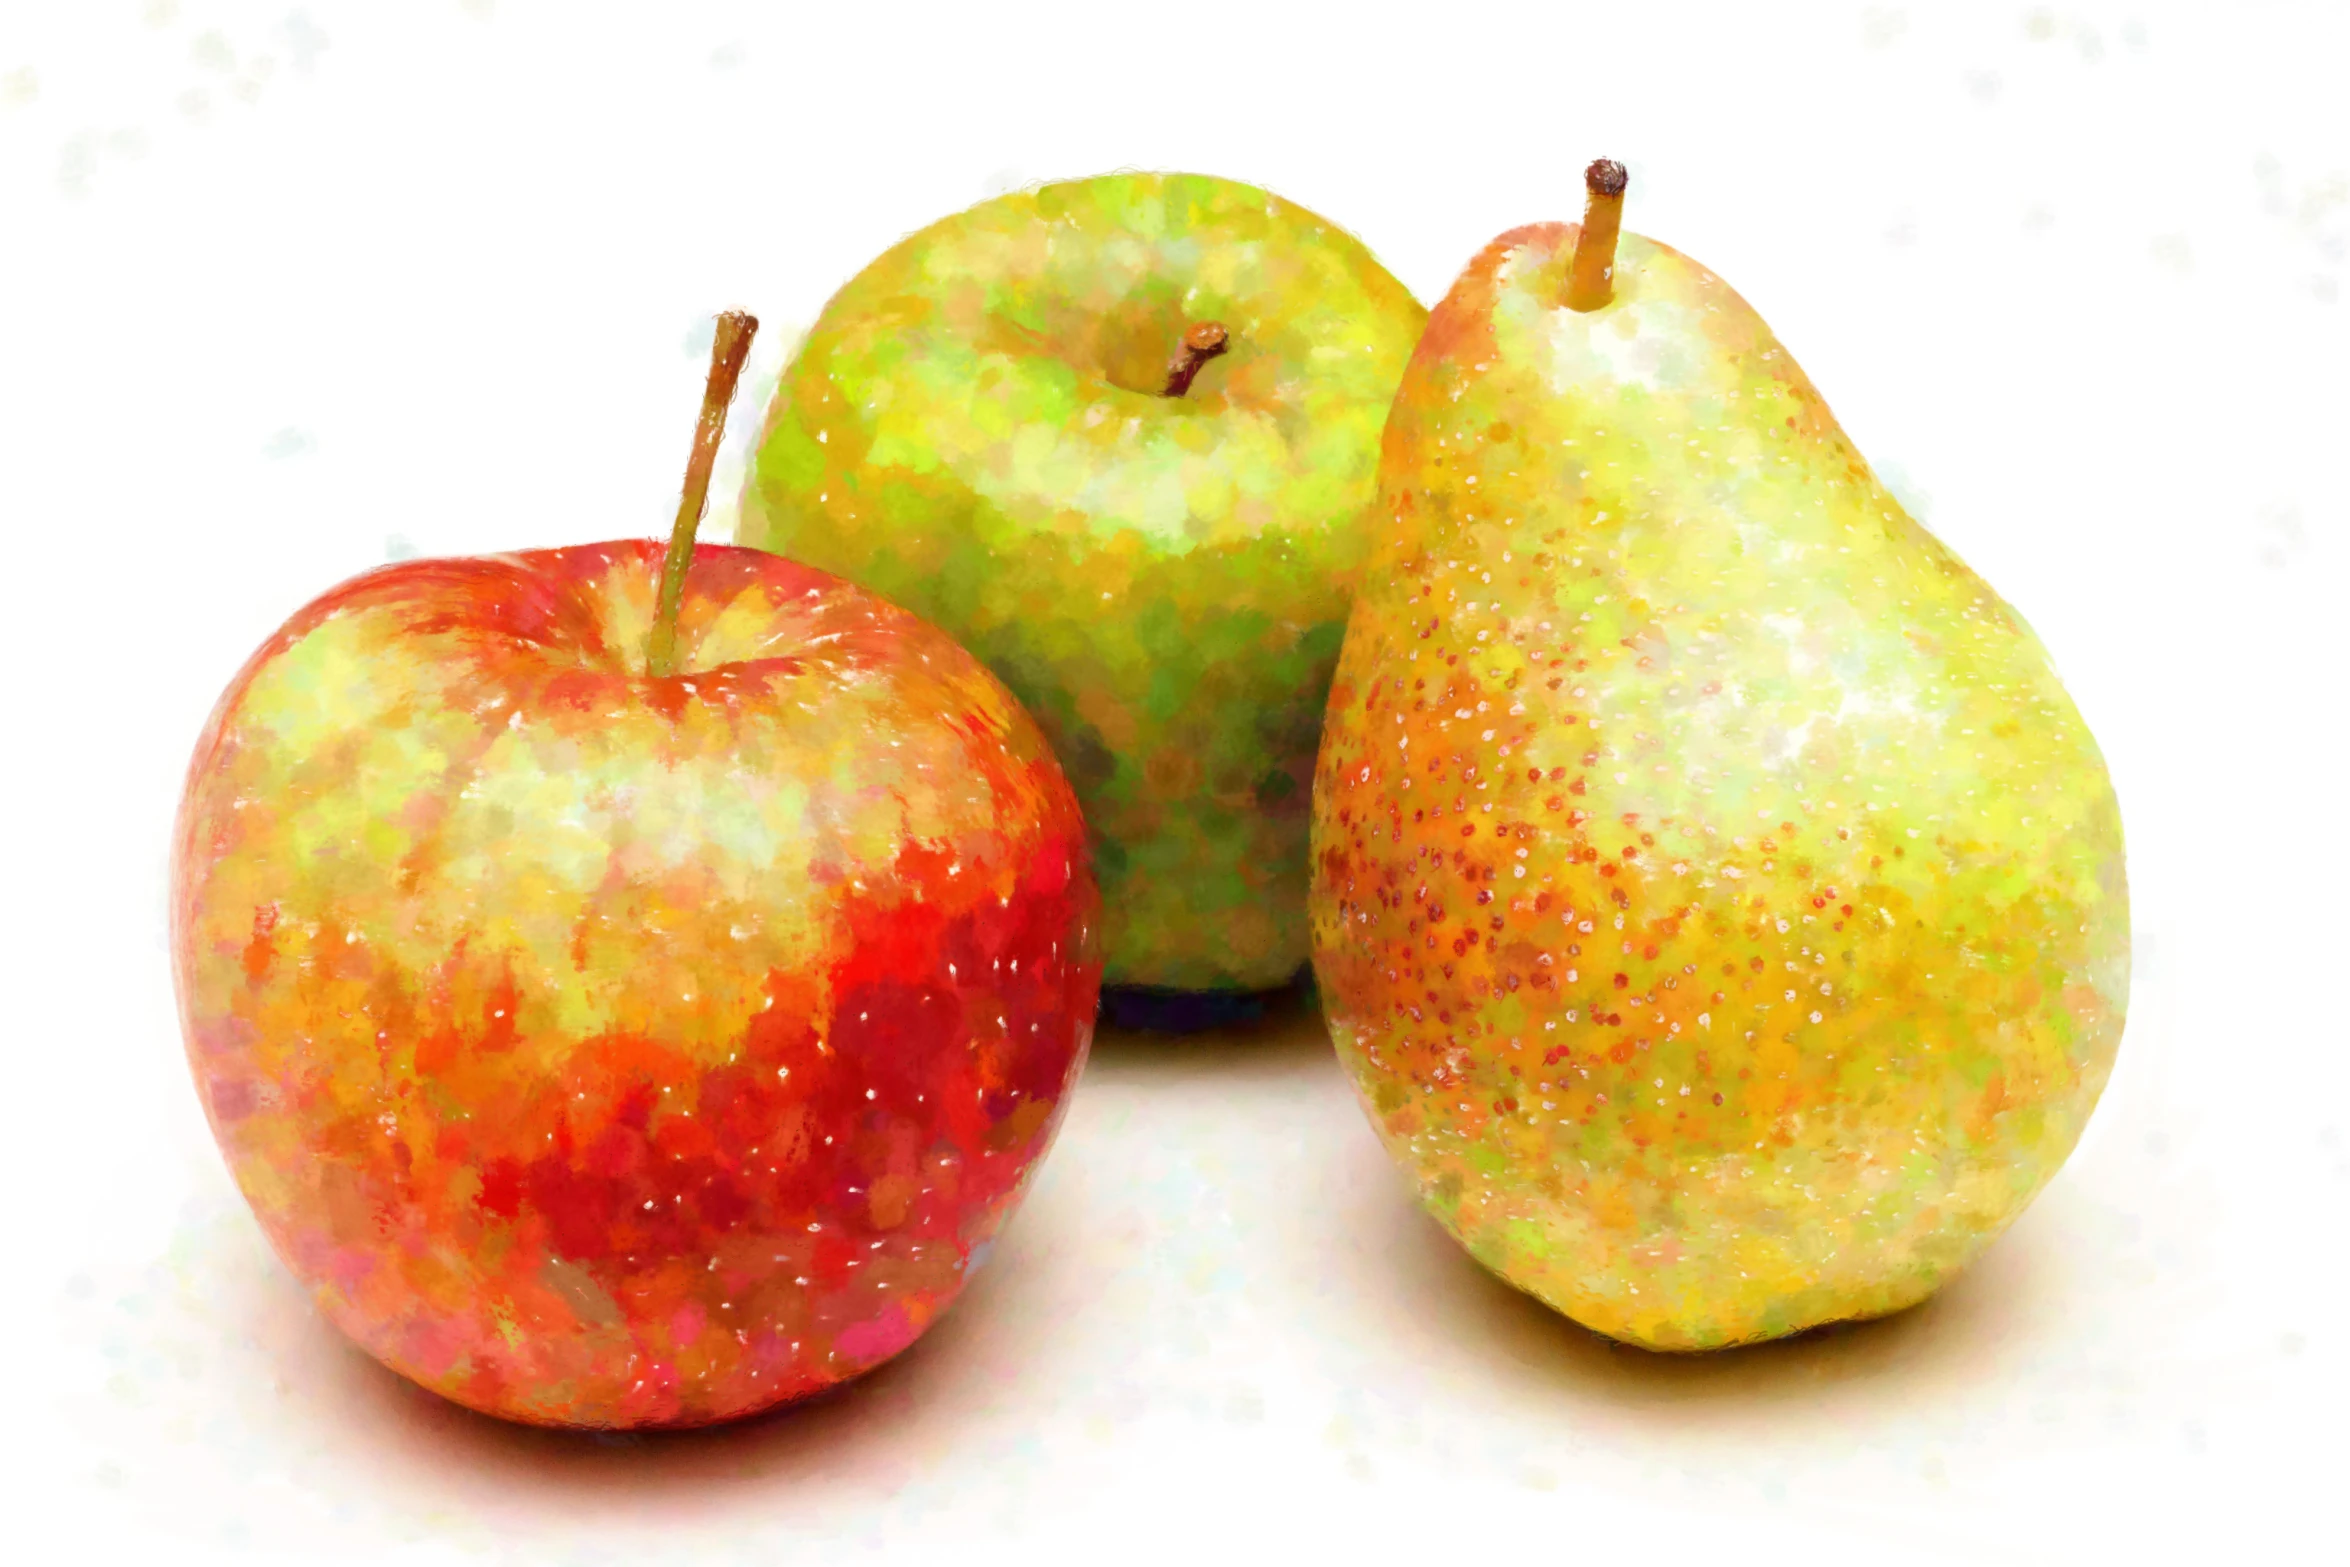 a drawing of an apple and pear side by side